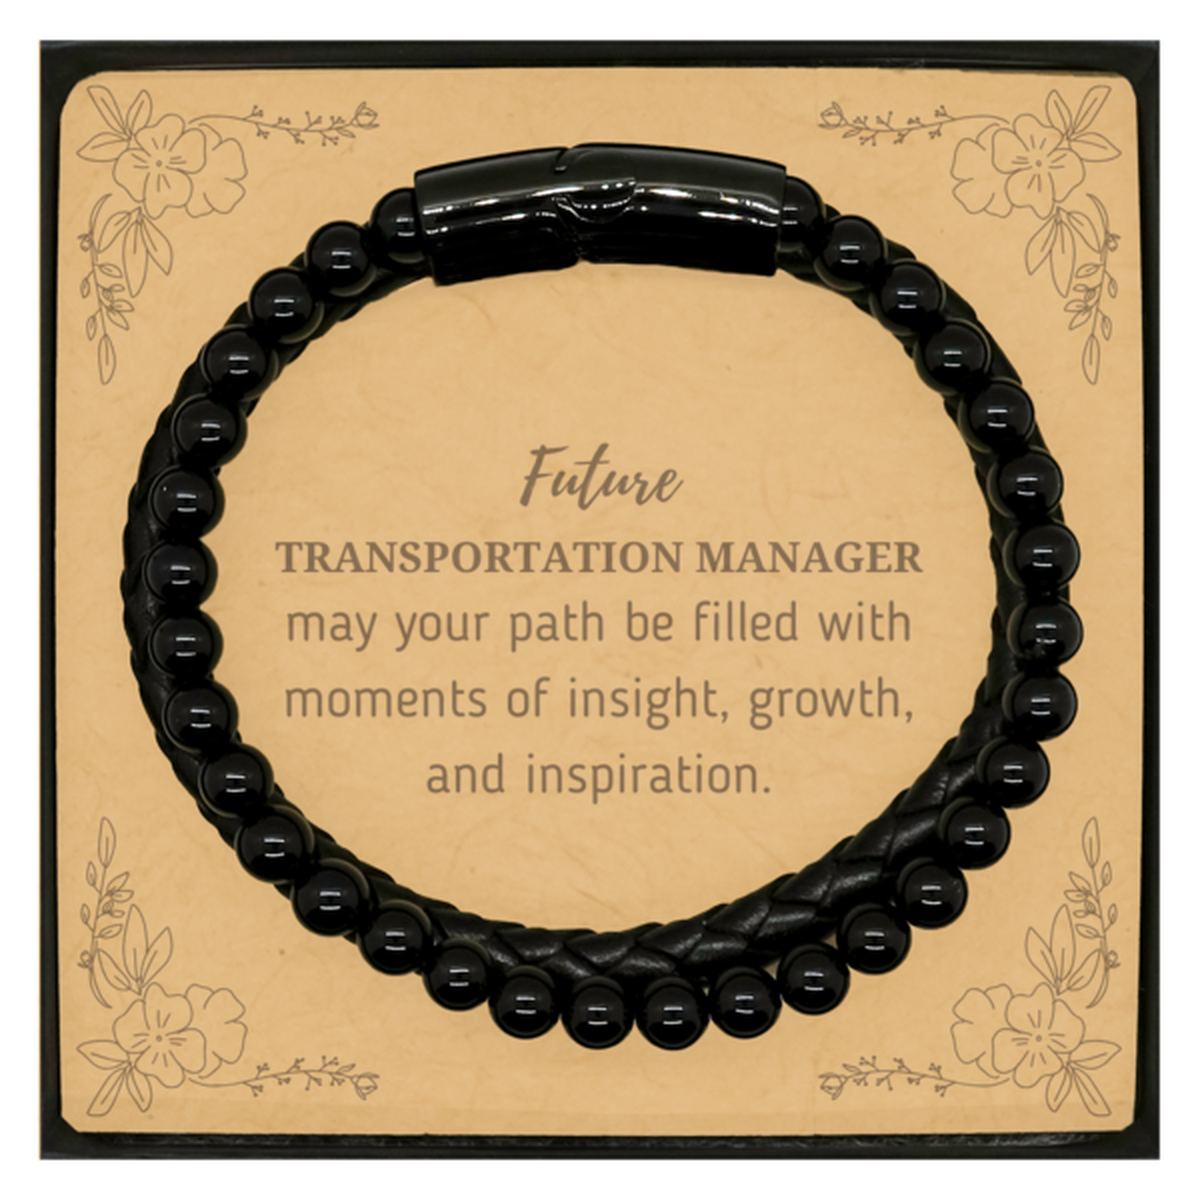 Future Transportation Manager Gifts, May your path be filled with moments of insight, Graduation Gifts for New Transportation Manager, Christmas Unique Stone Leather Bracelets For Men, Women, Friends